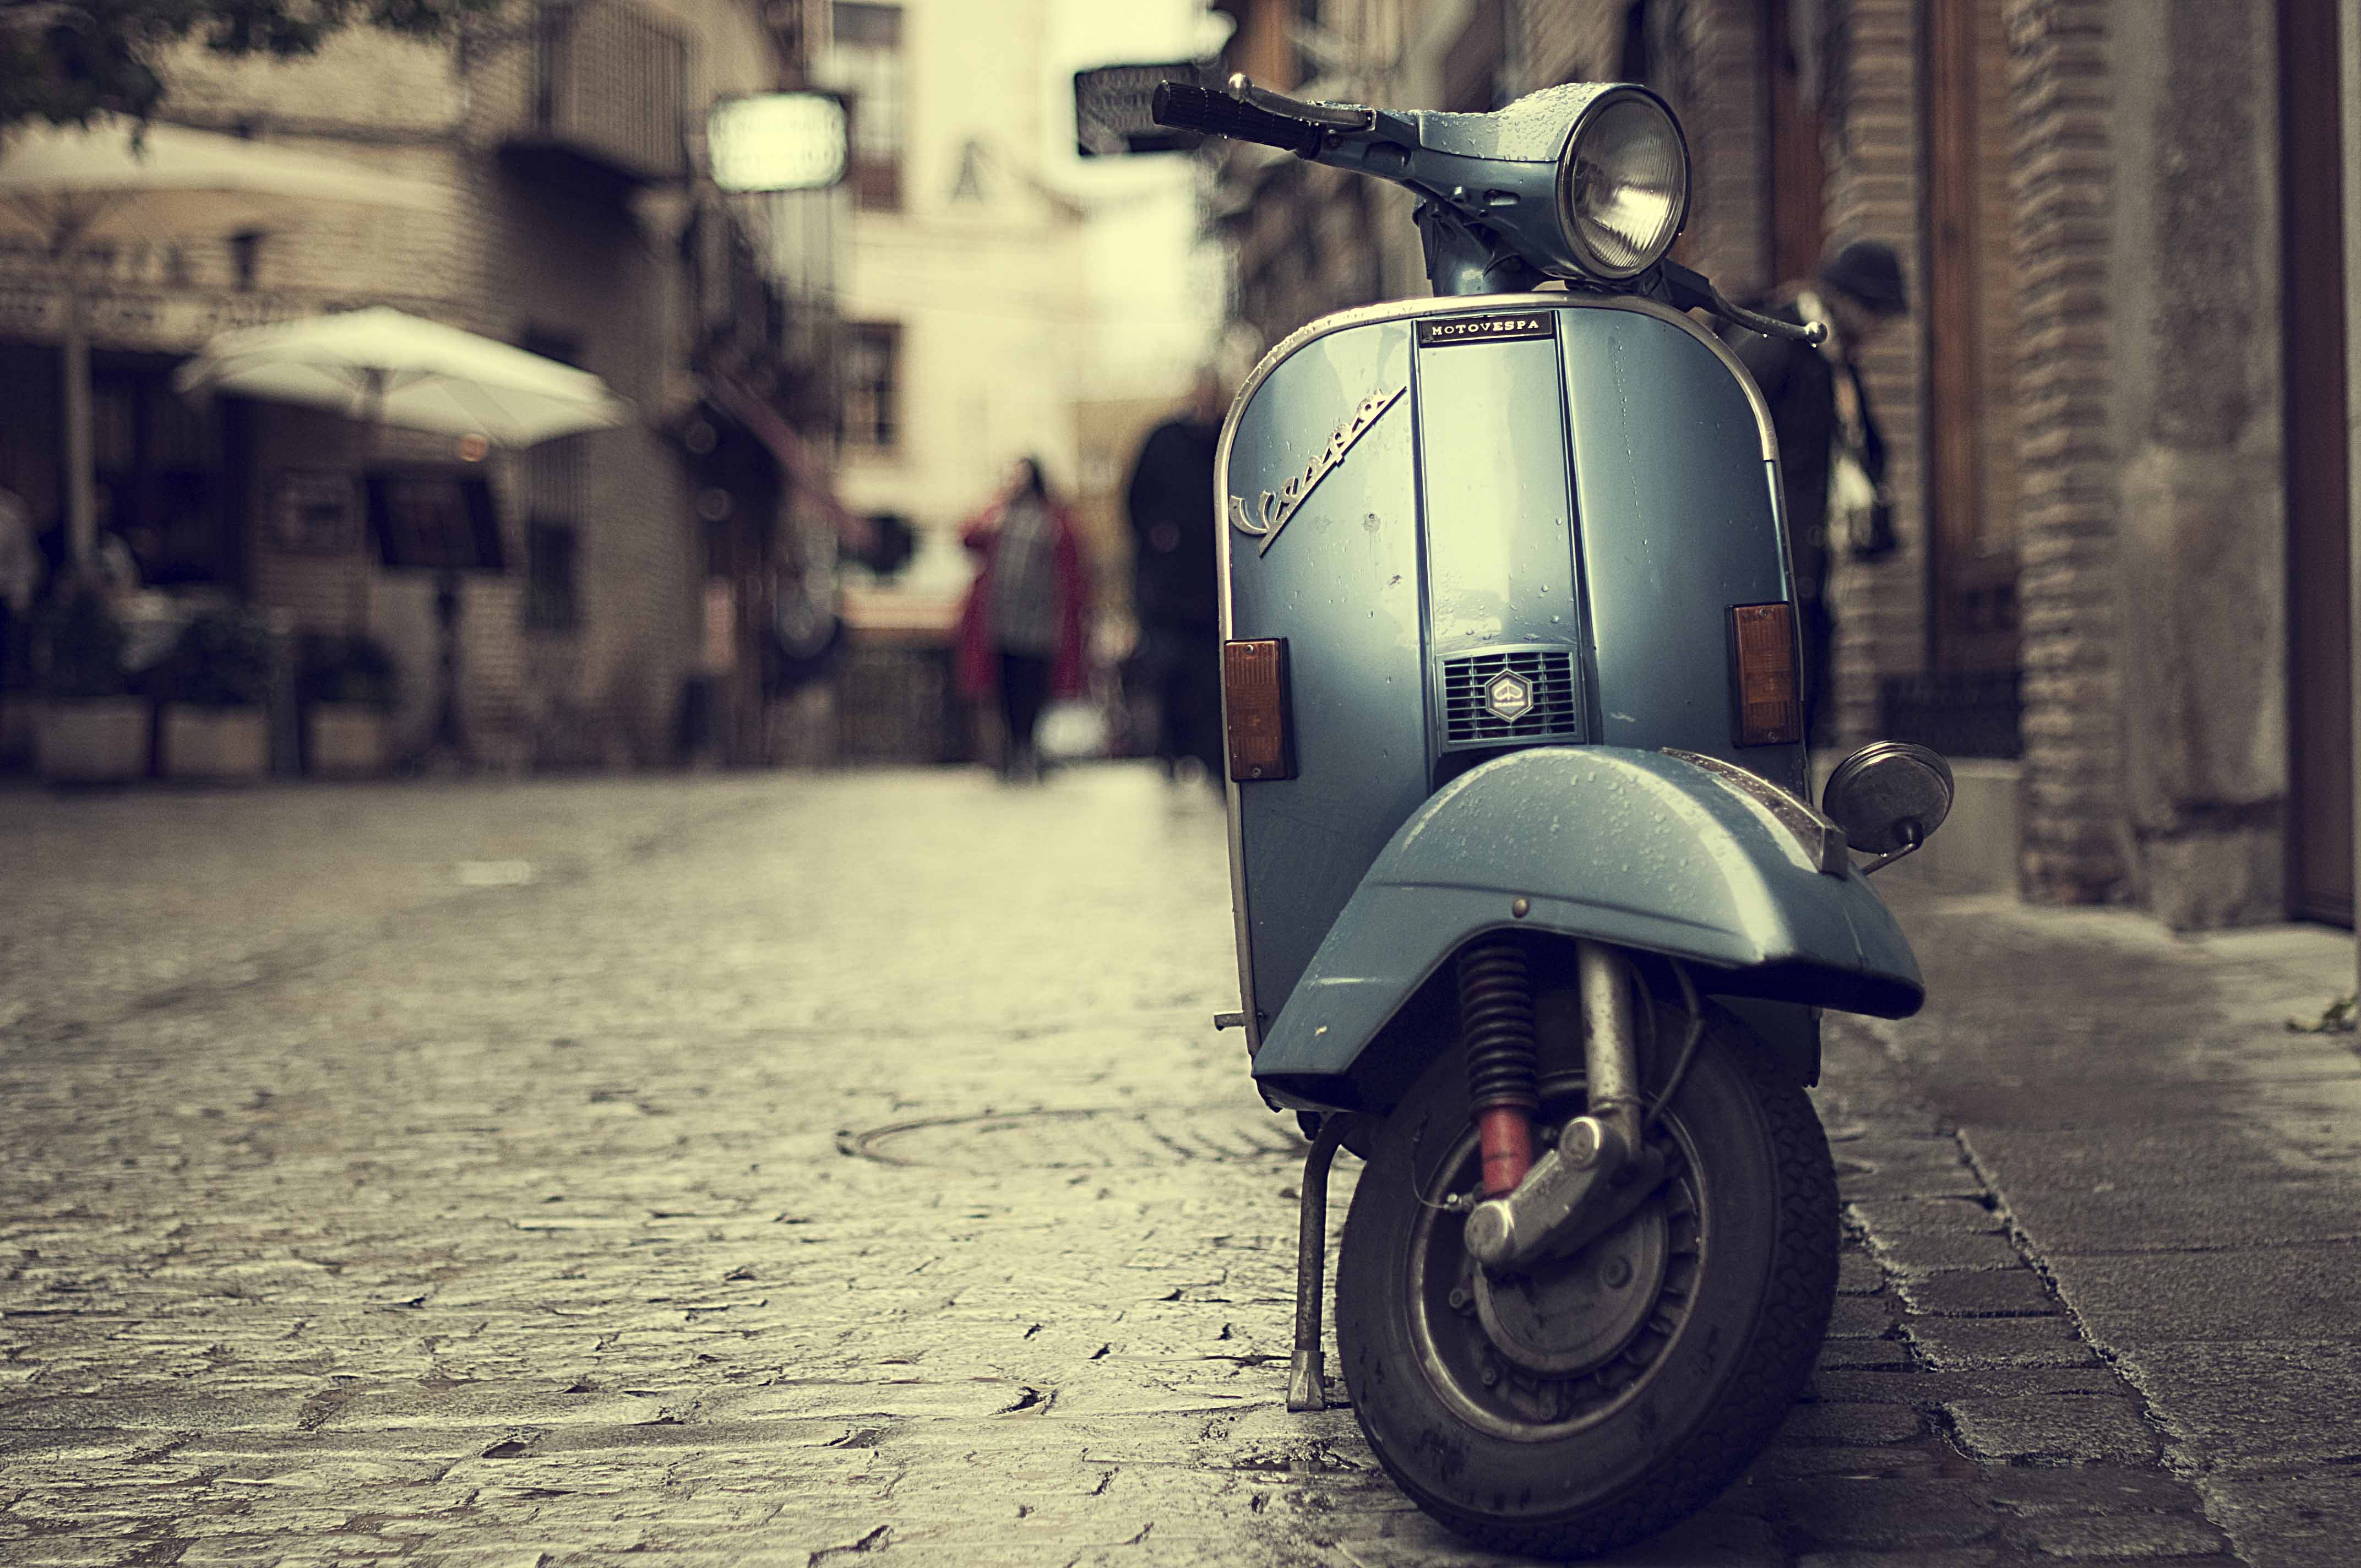 OW:651 Wallpaper, Full HD Awesome Vespa Wallpaper Collection